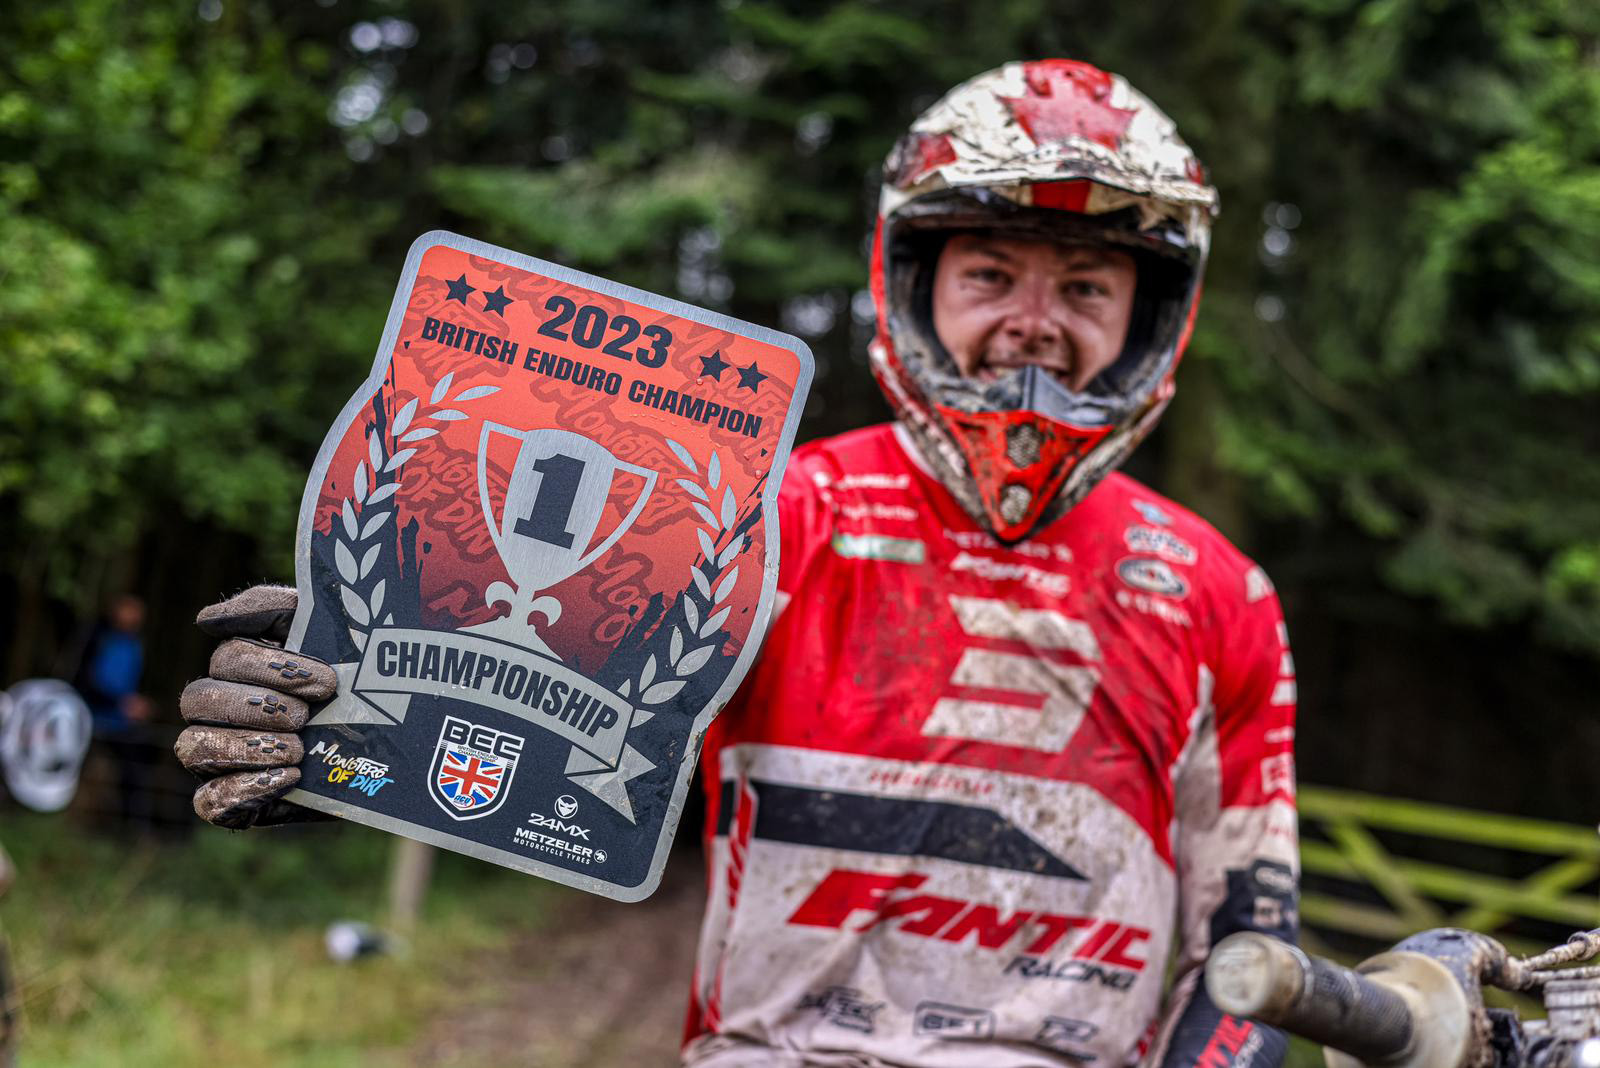 2023 British Enduro Champions Crowned – Jed Etchells claims maiden GB title